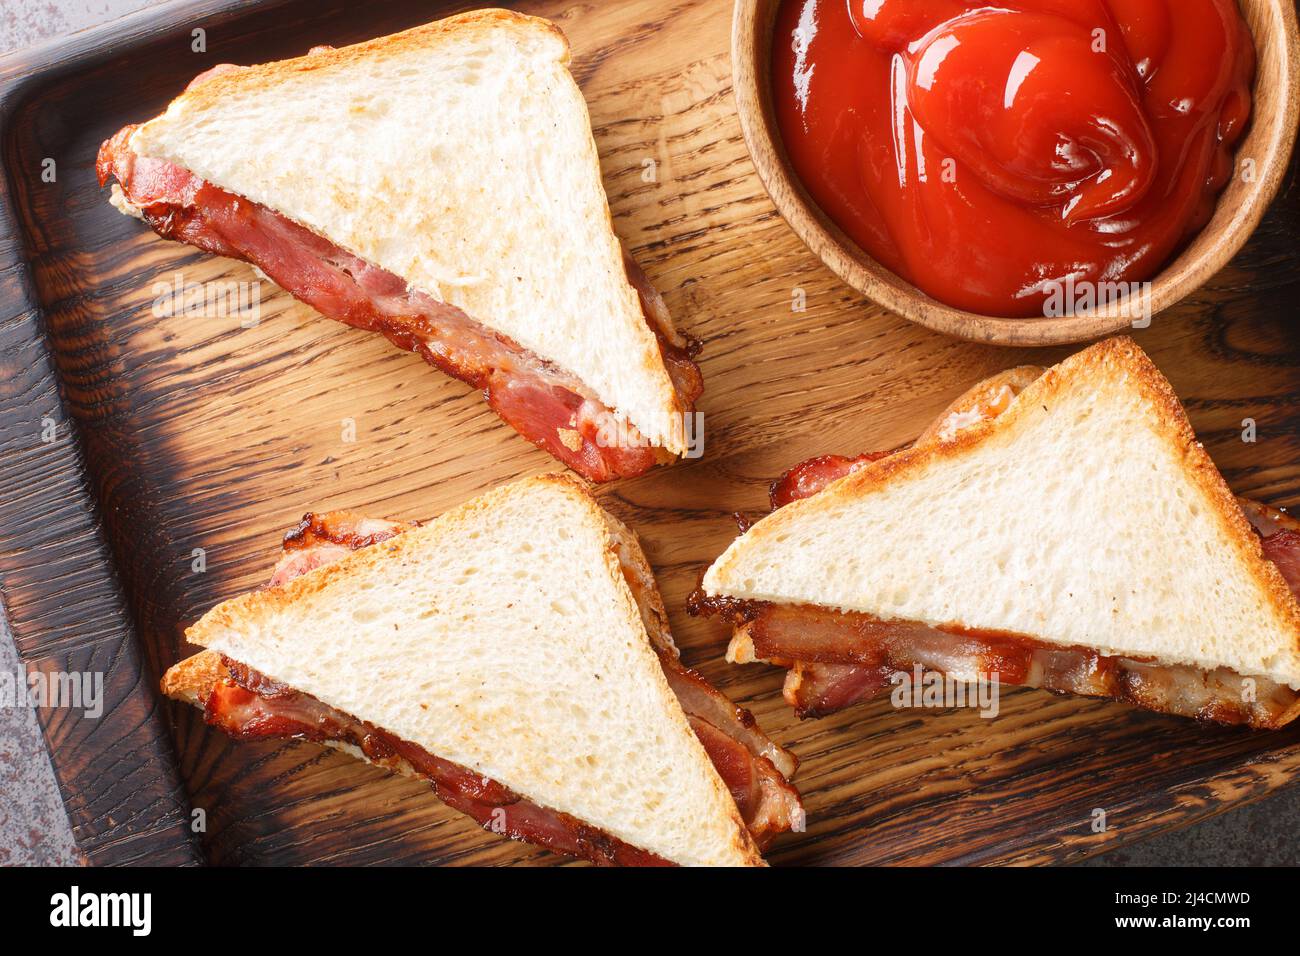 Bacon butty is a British sandwich consisting of crispy bacon, butter, and sauce closeup in the wooden tray on the table. Horizontal top view from abov Stock Photo